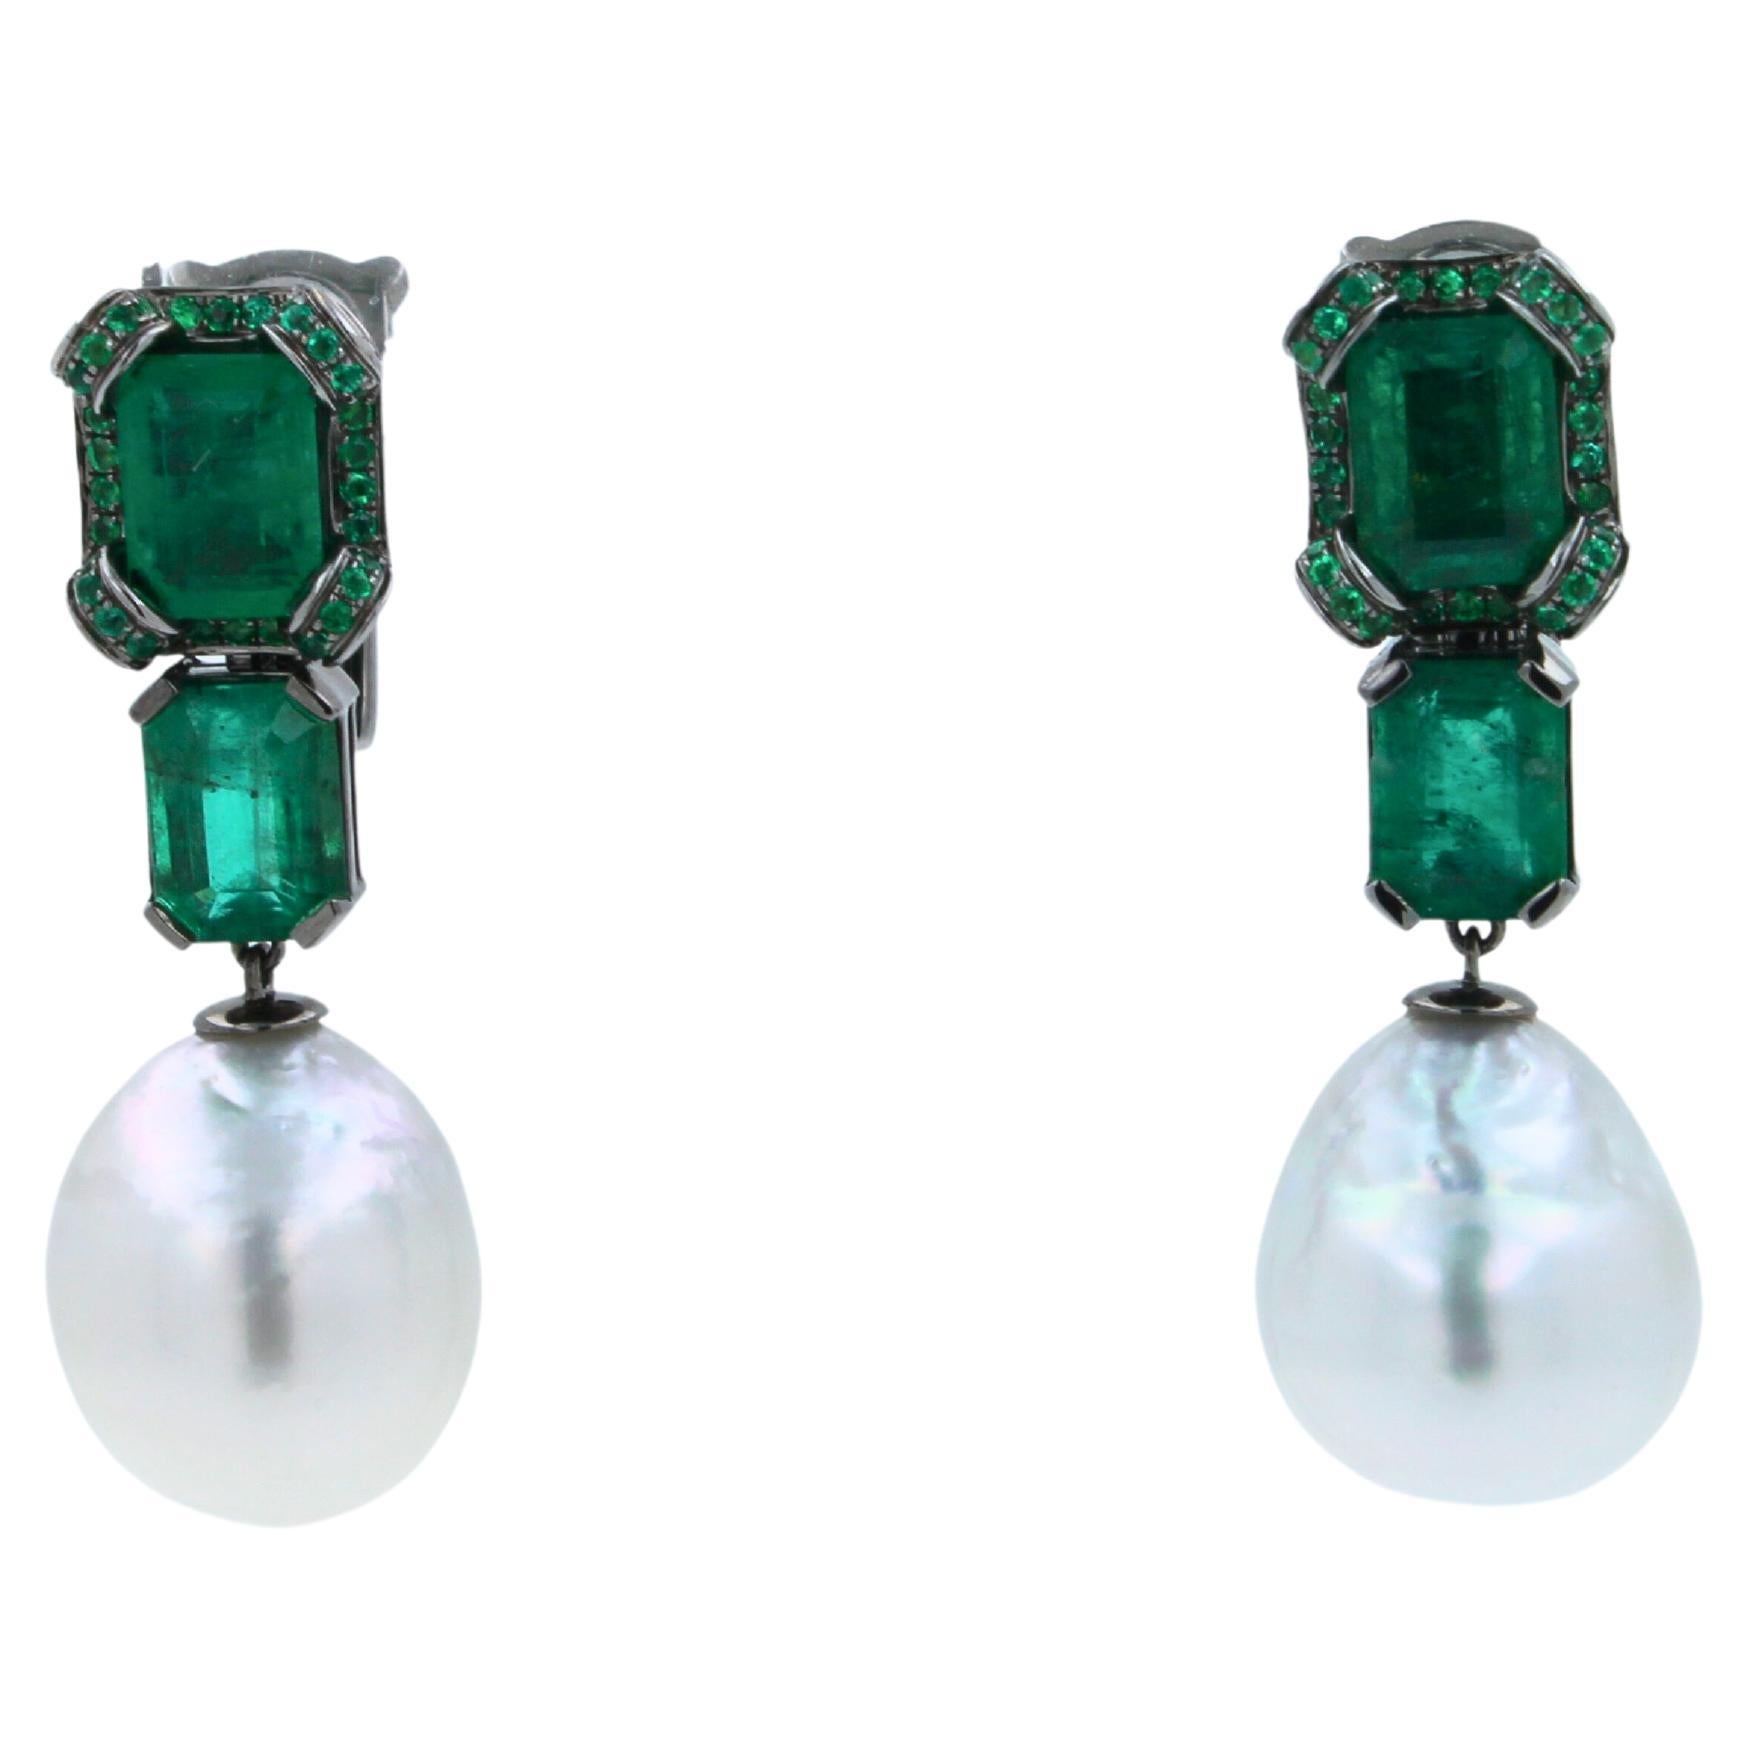 Silvery White South Sea Pearl Drop Emerald Pave 18K White Black Gold Earrings
18 Karat Solid White Gold + Black Rhodium Layered Plating
AAA Quality Extremely Beautiful, Captivating Pearls
High-End, Luxury Crafting & Finish
15.50 mm x 12.50 mm